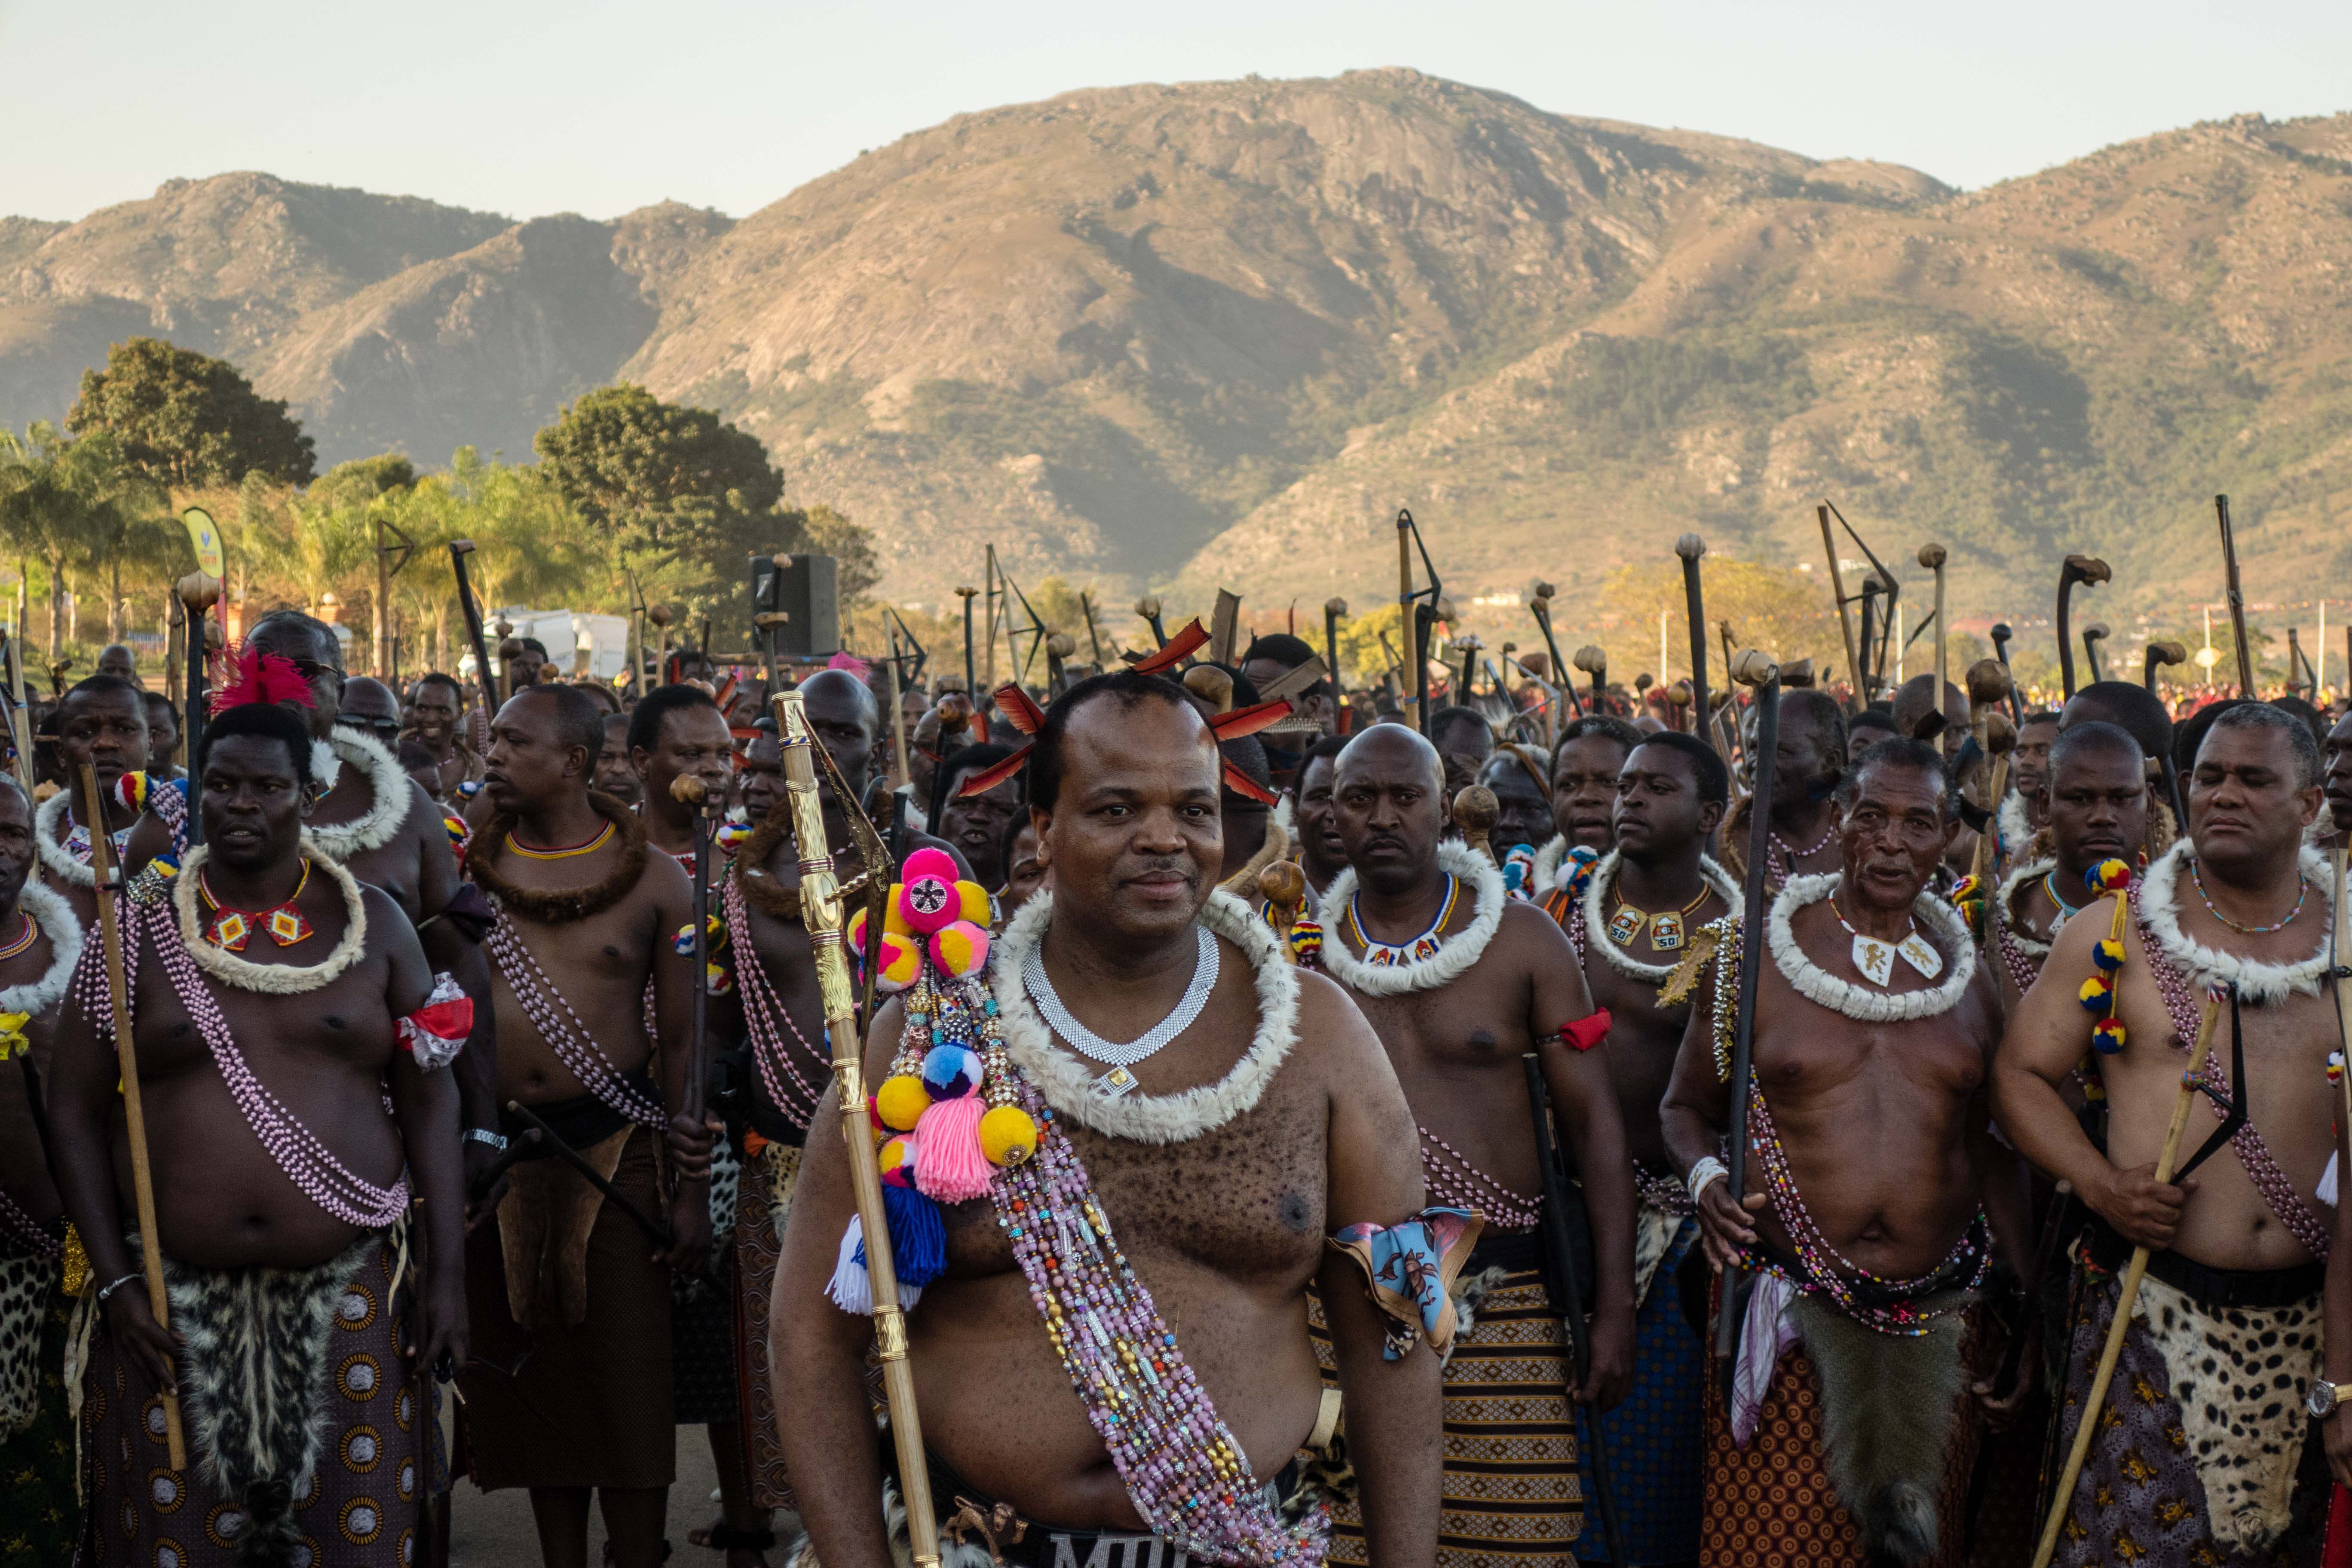 From Swaziland to eSwatini: the Story of the Kingdom's Name Change